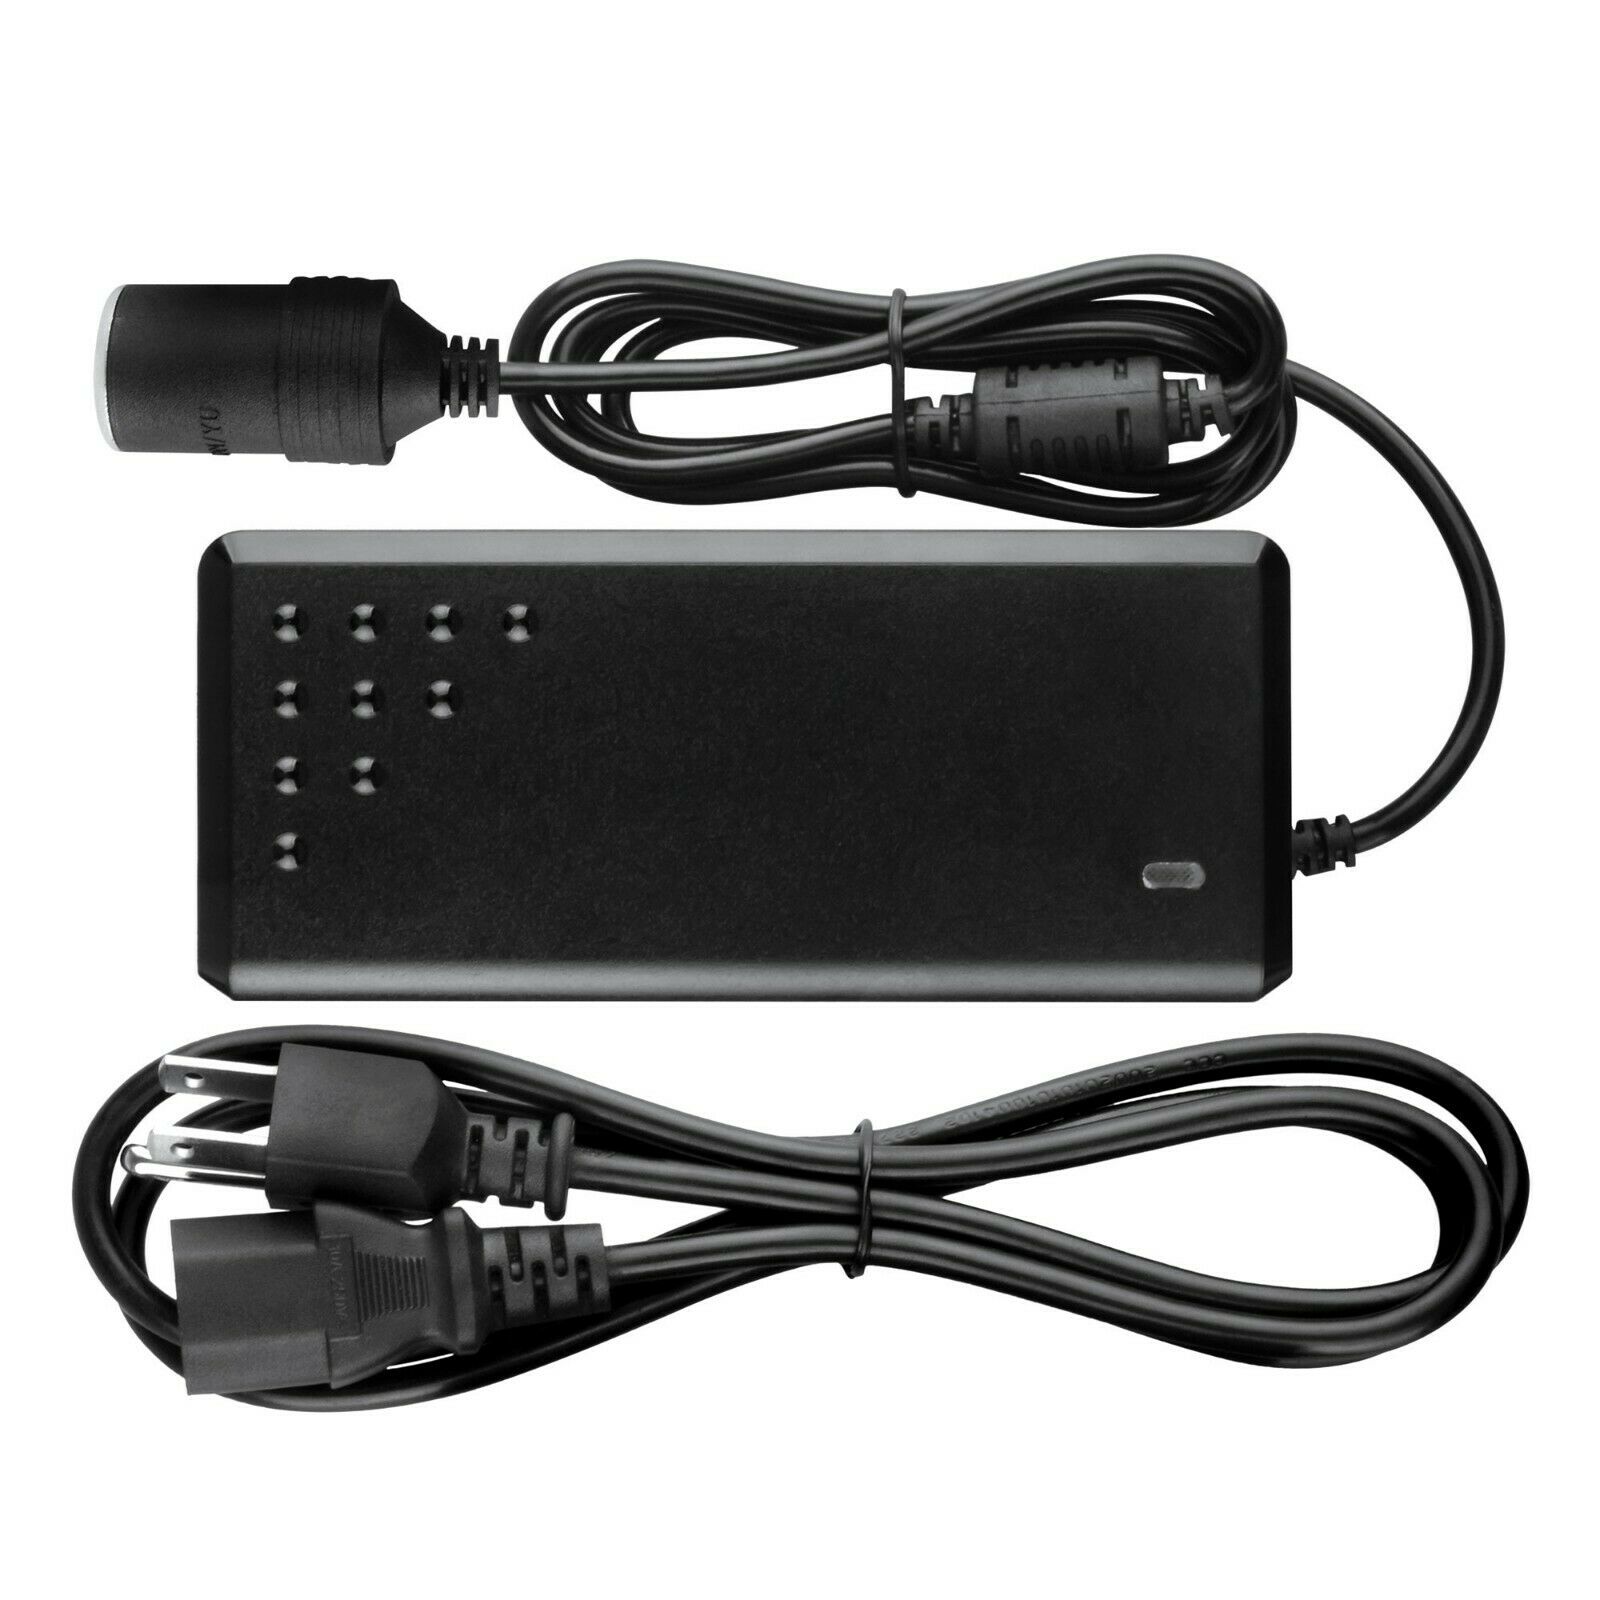 AC Adapter For Coleman Powerchill Thermoelectric Coolers 40-Quart PowerChill TE Specifications: Type: AC to DC Standard